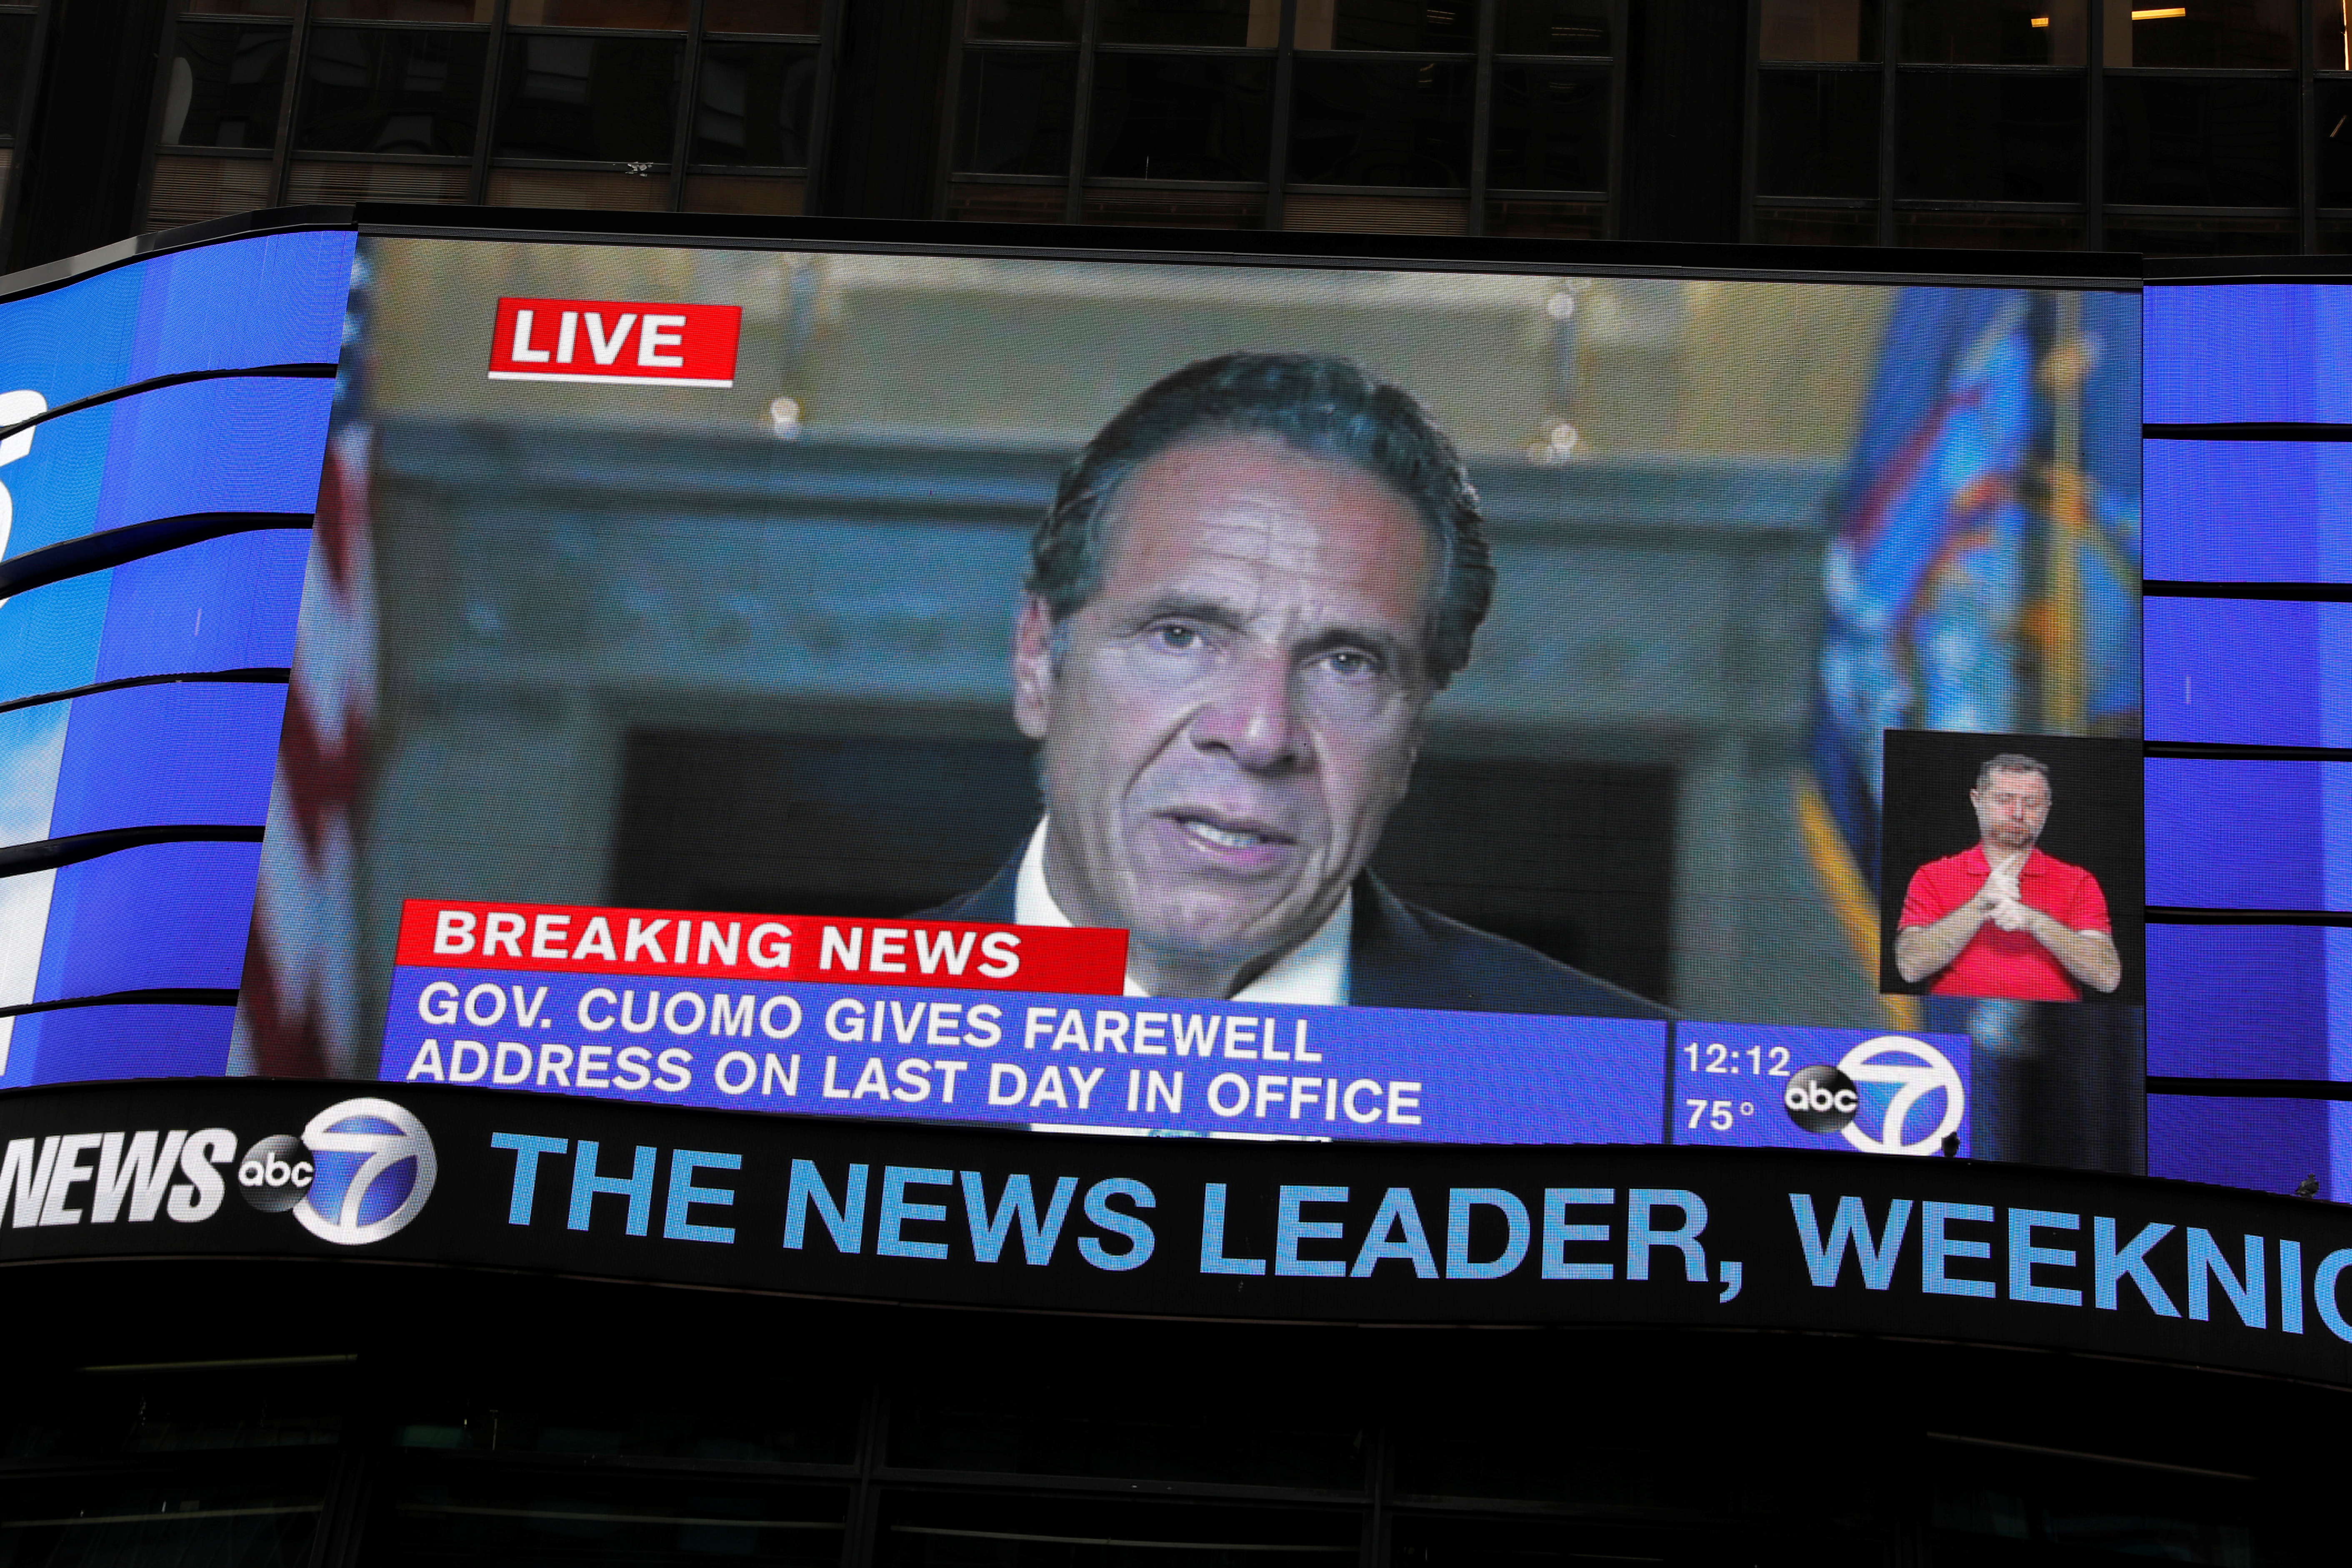 A farewell speech by New York Governor Andrew Cuomo is broadcast live on a screen in Times Square on his final day in office in Manhattan, New York City